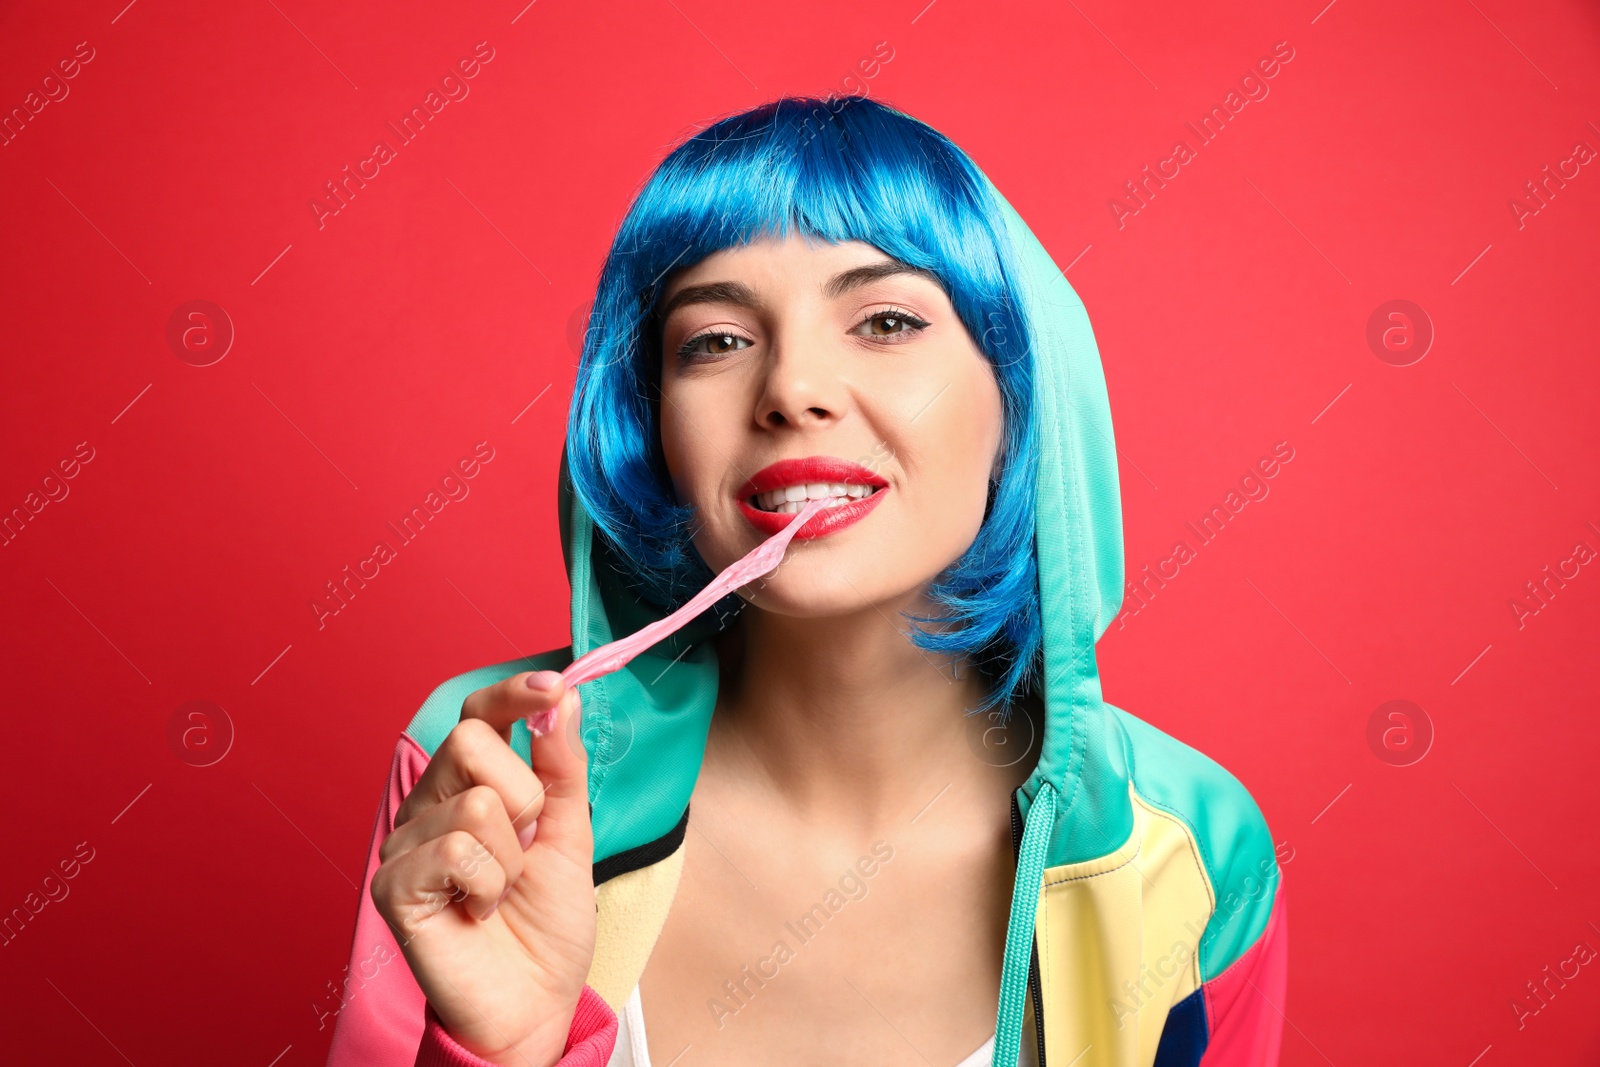 Photo of Fashionable young woman in colorful wig chewing bubblegum on red background